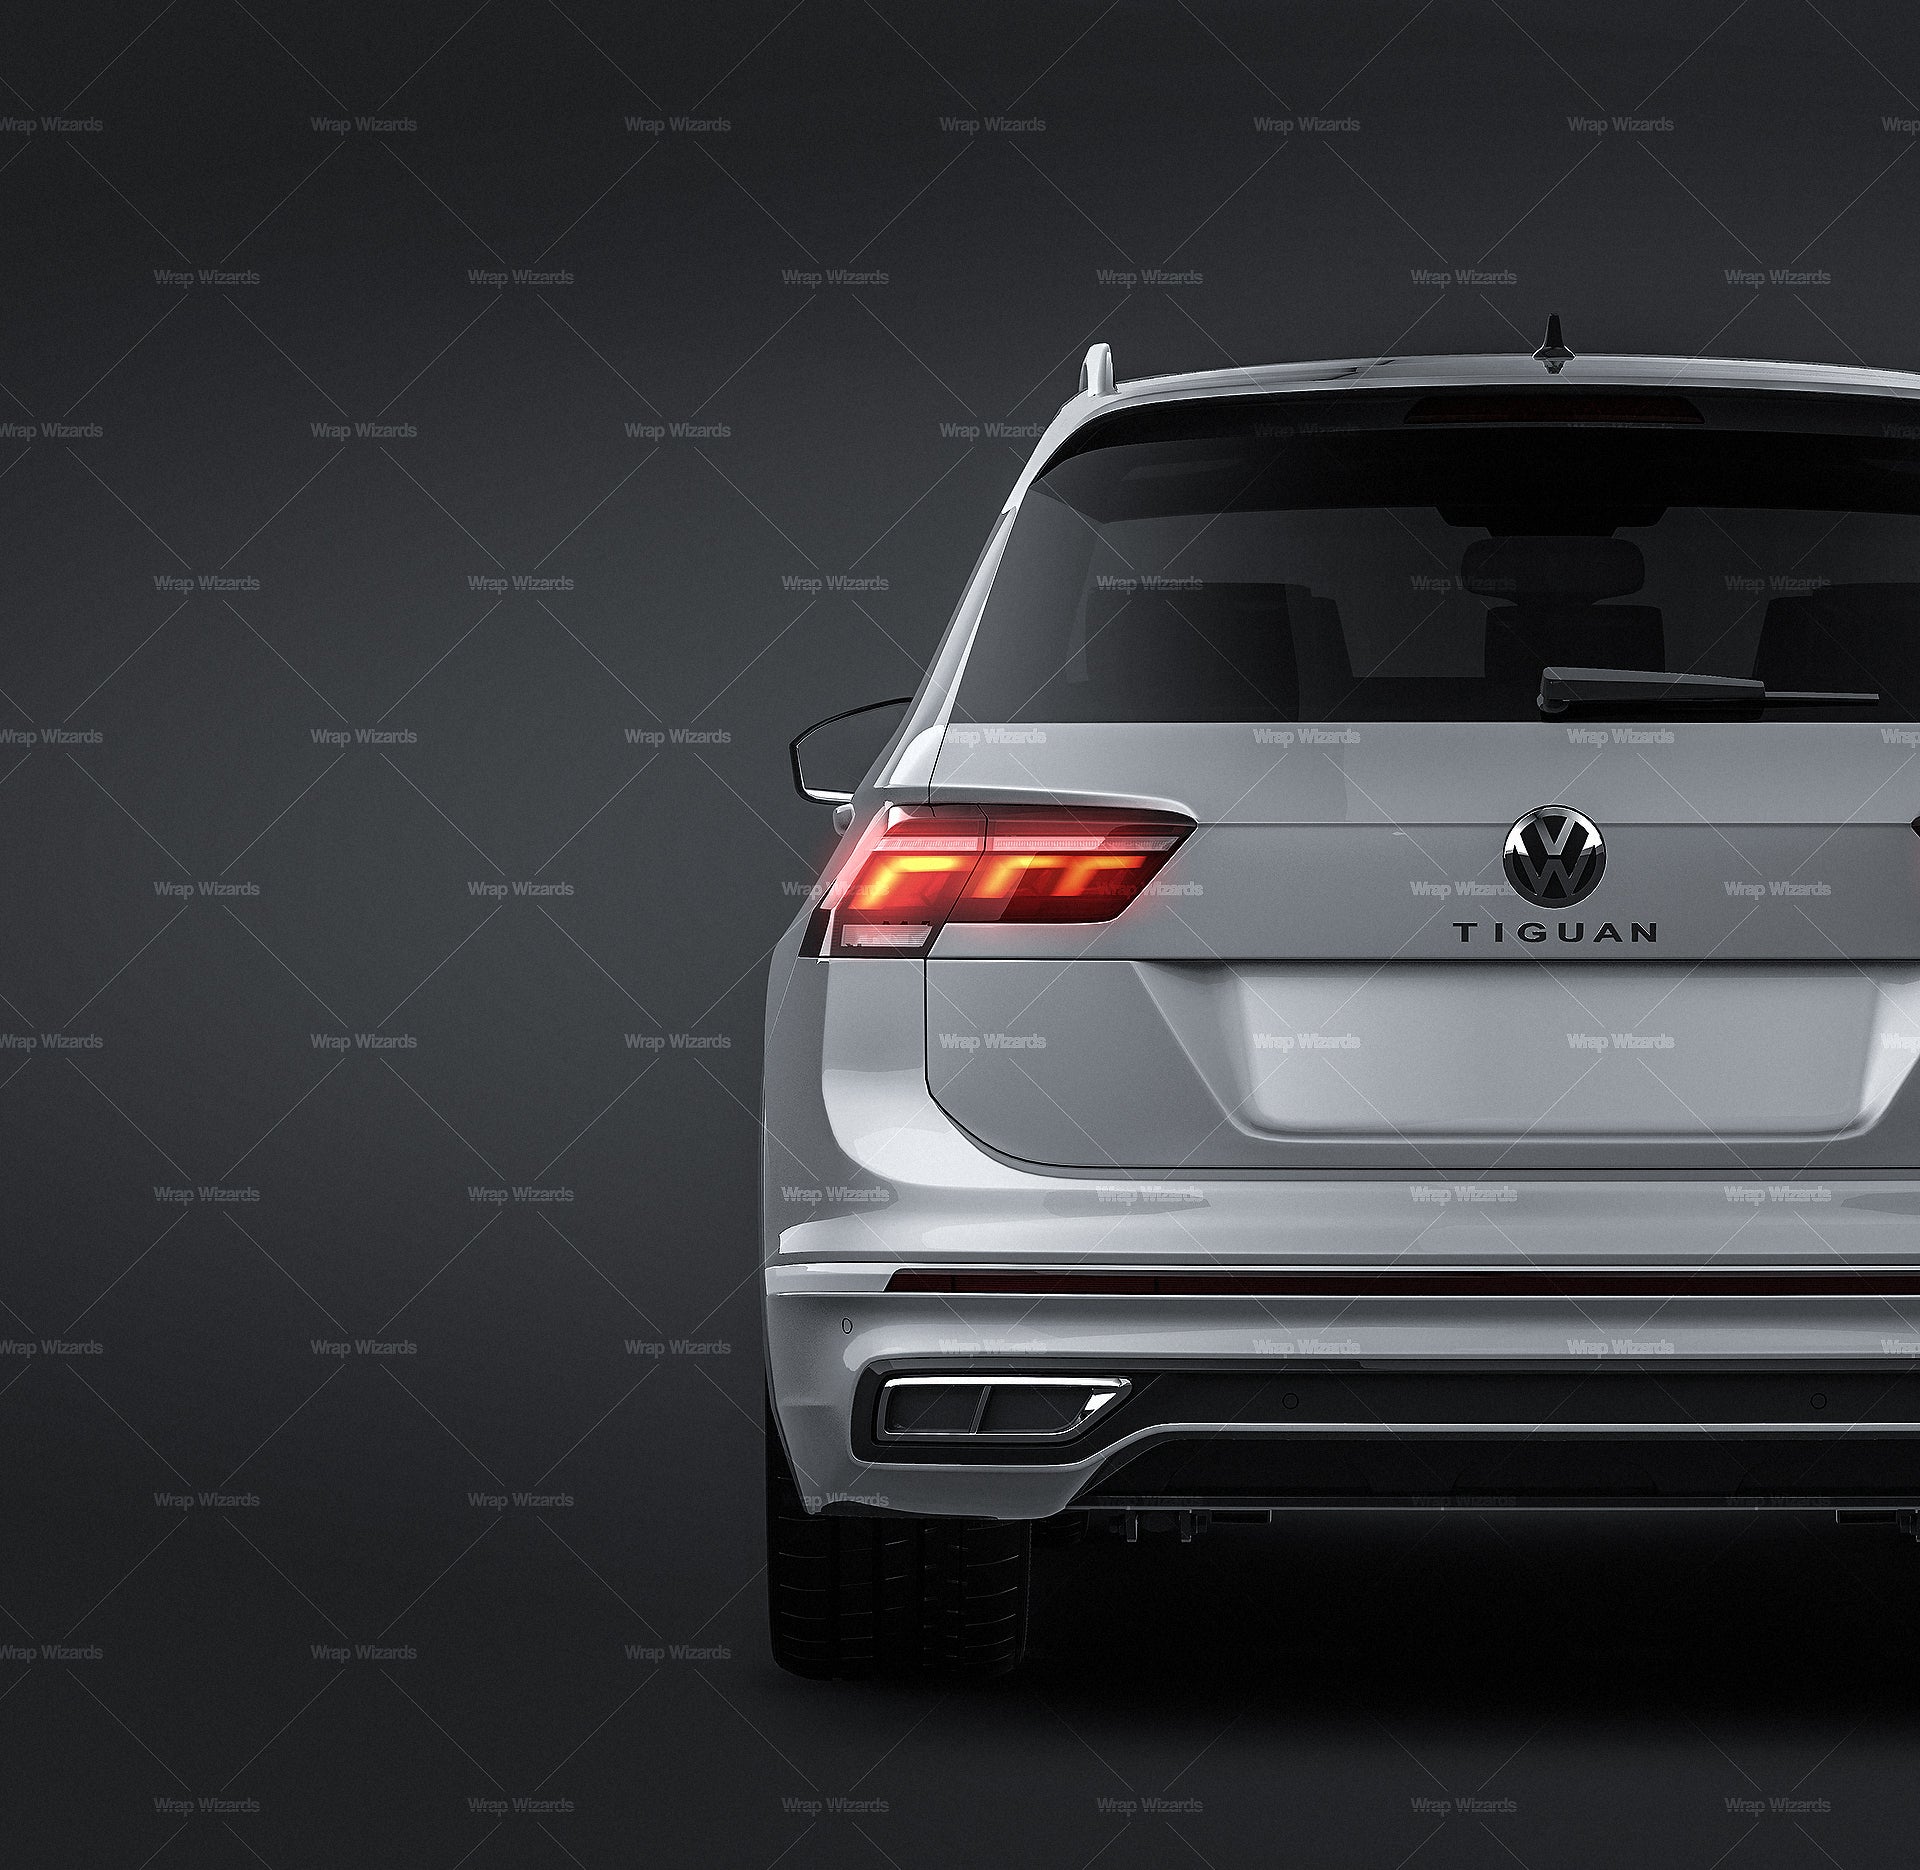 Volkswagen Tiguan R-Line 2021 glossy finish - all sides Car Mockup Template.psd